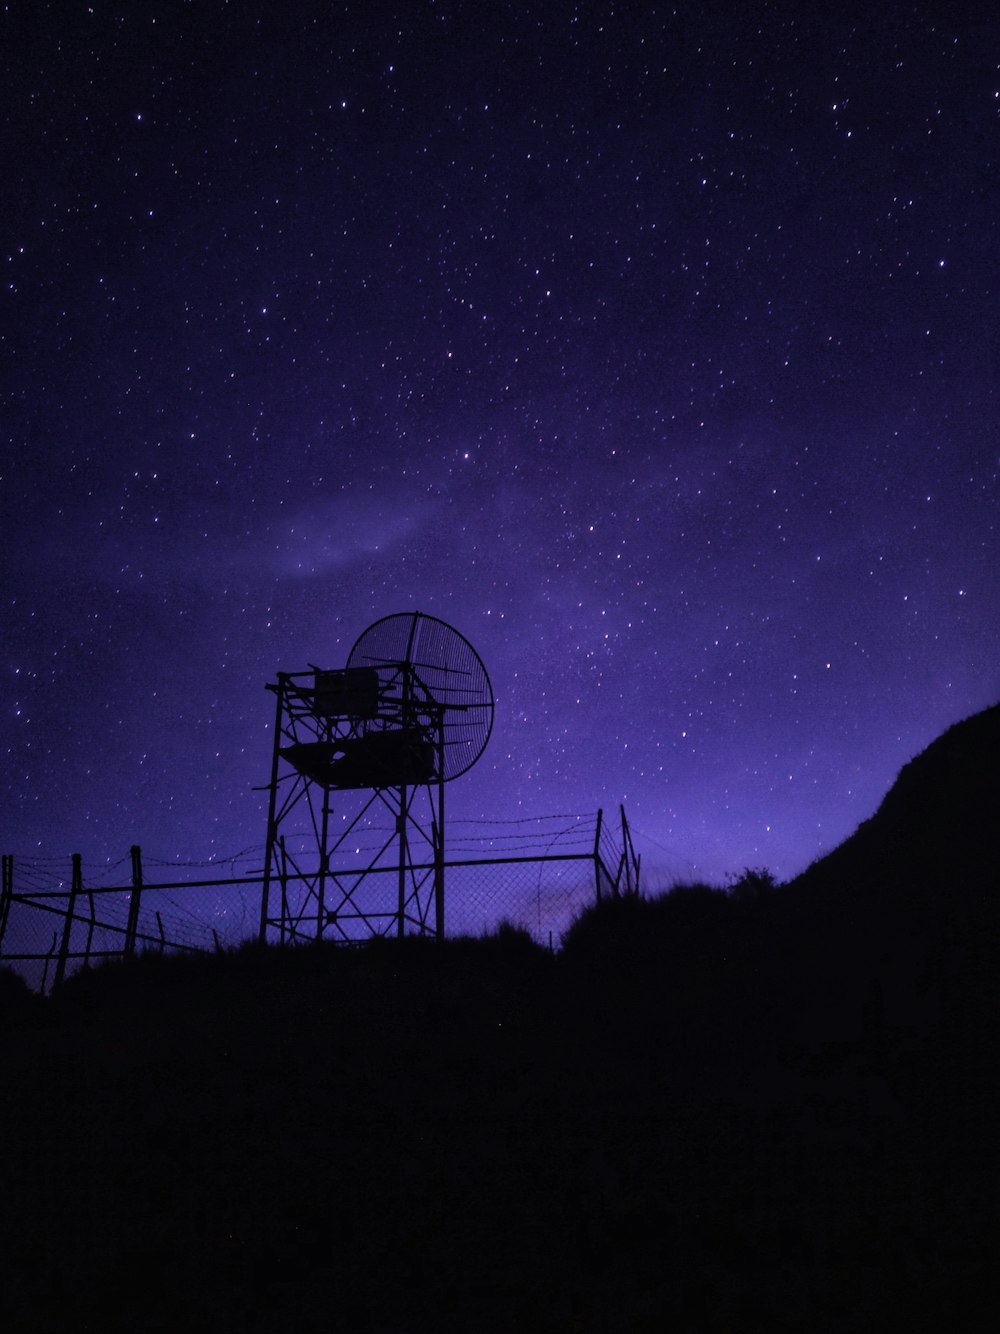 a night sky with stars and a silhouette of a tower